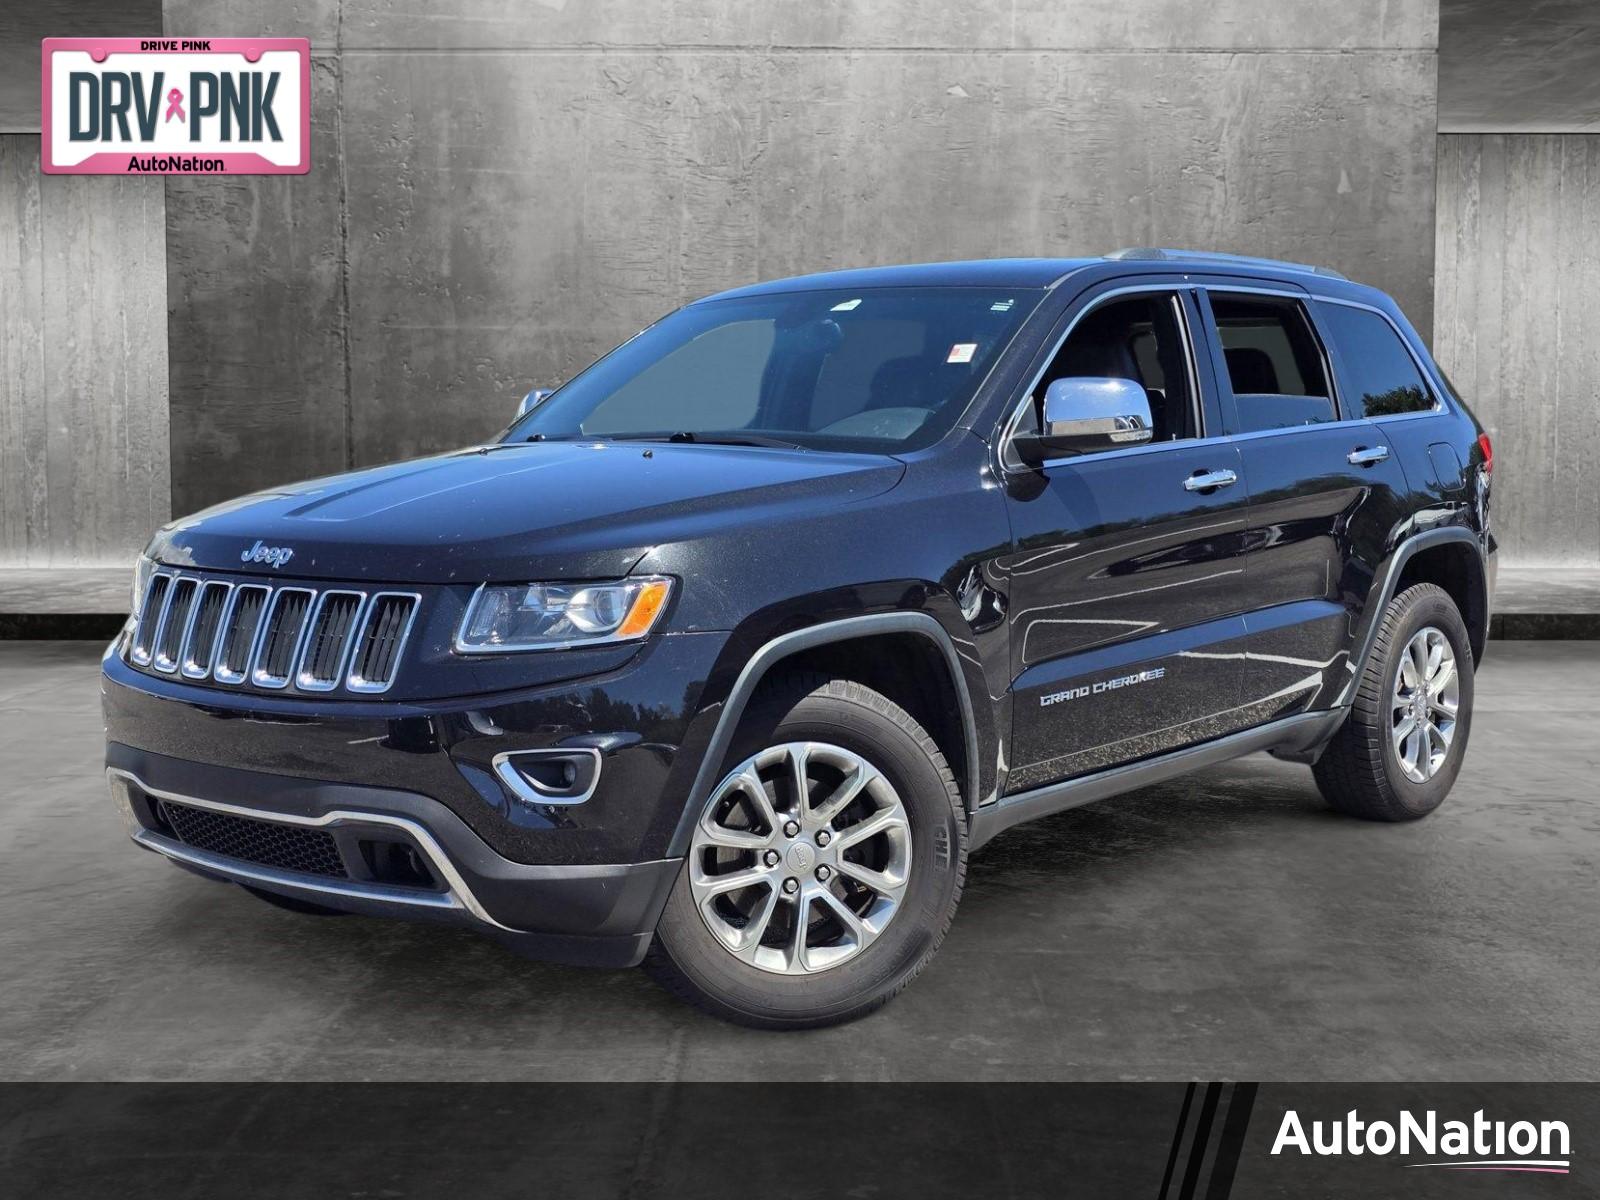 2014 Jeep Grand Cherokee Vehicle Photo in Clearwater, FL 33761